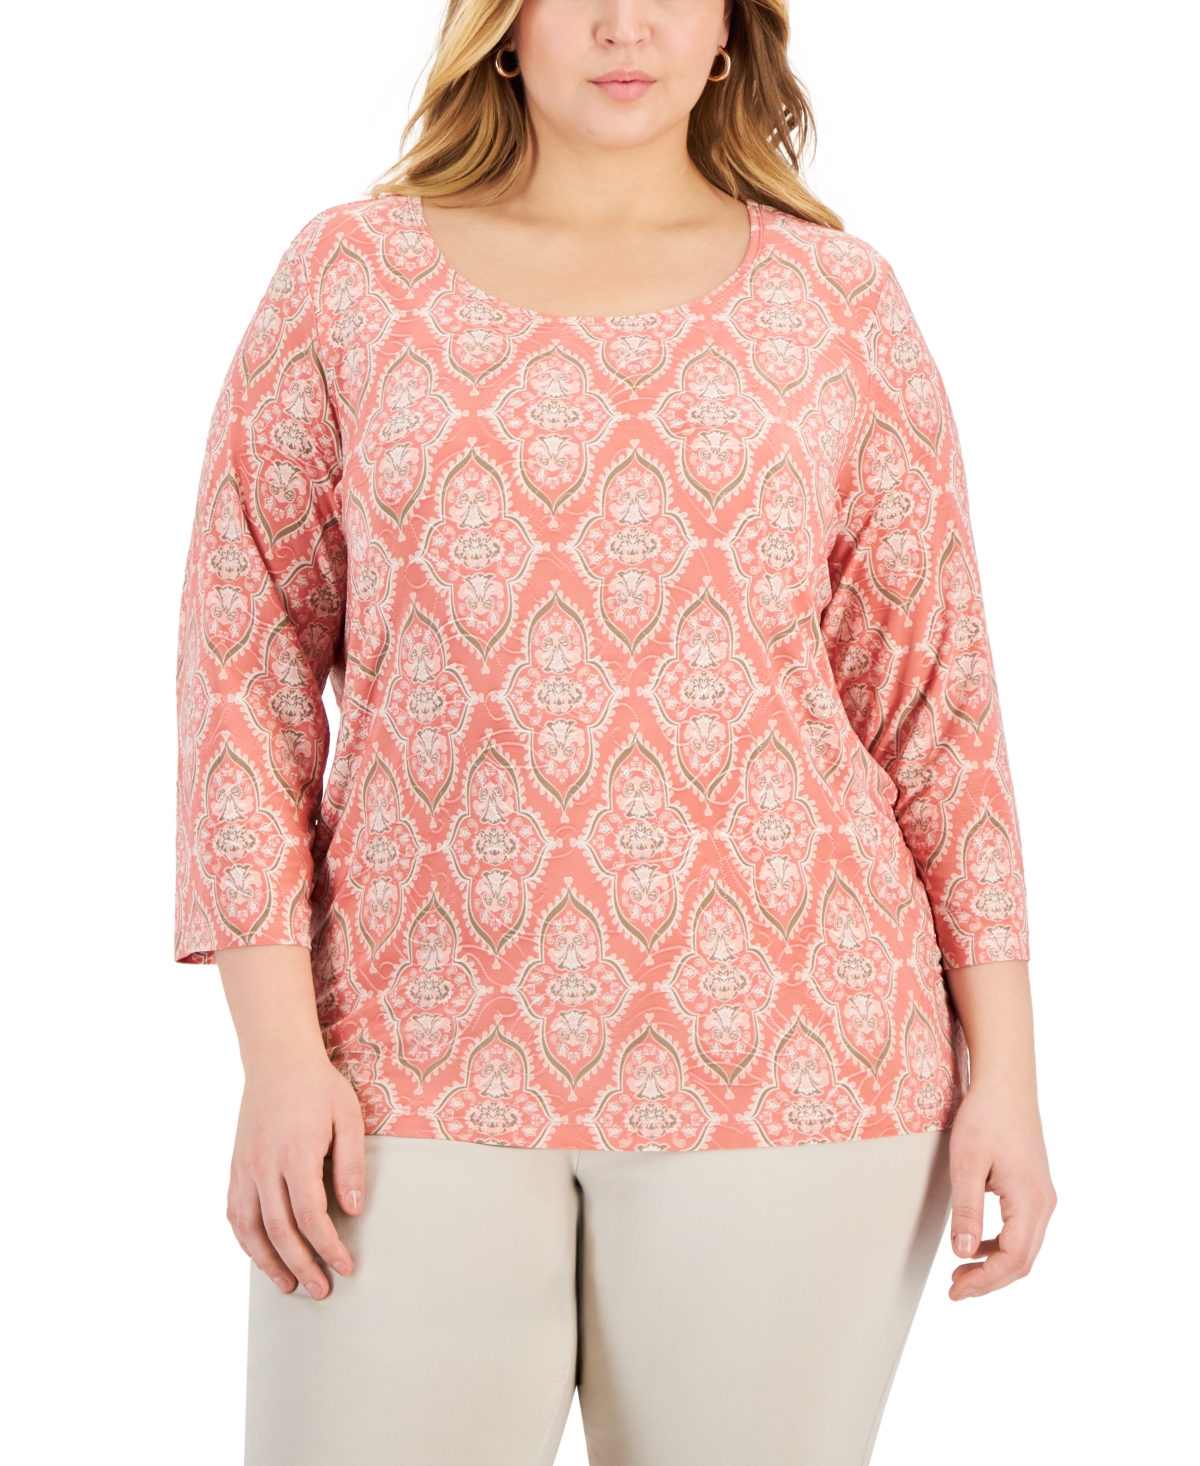 Jm Collection Plus Size Medallion Printed Jacquard Top, Created For Macy's In Burnt Brick Combo